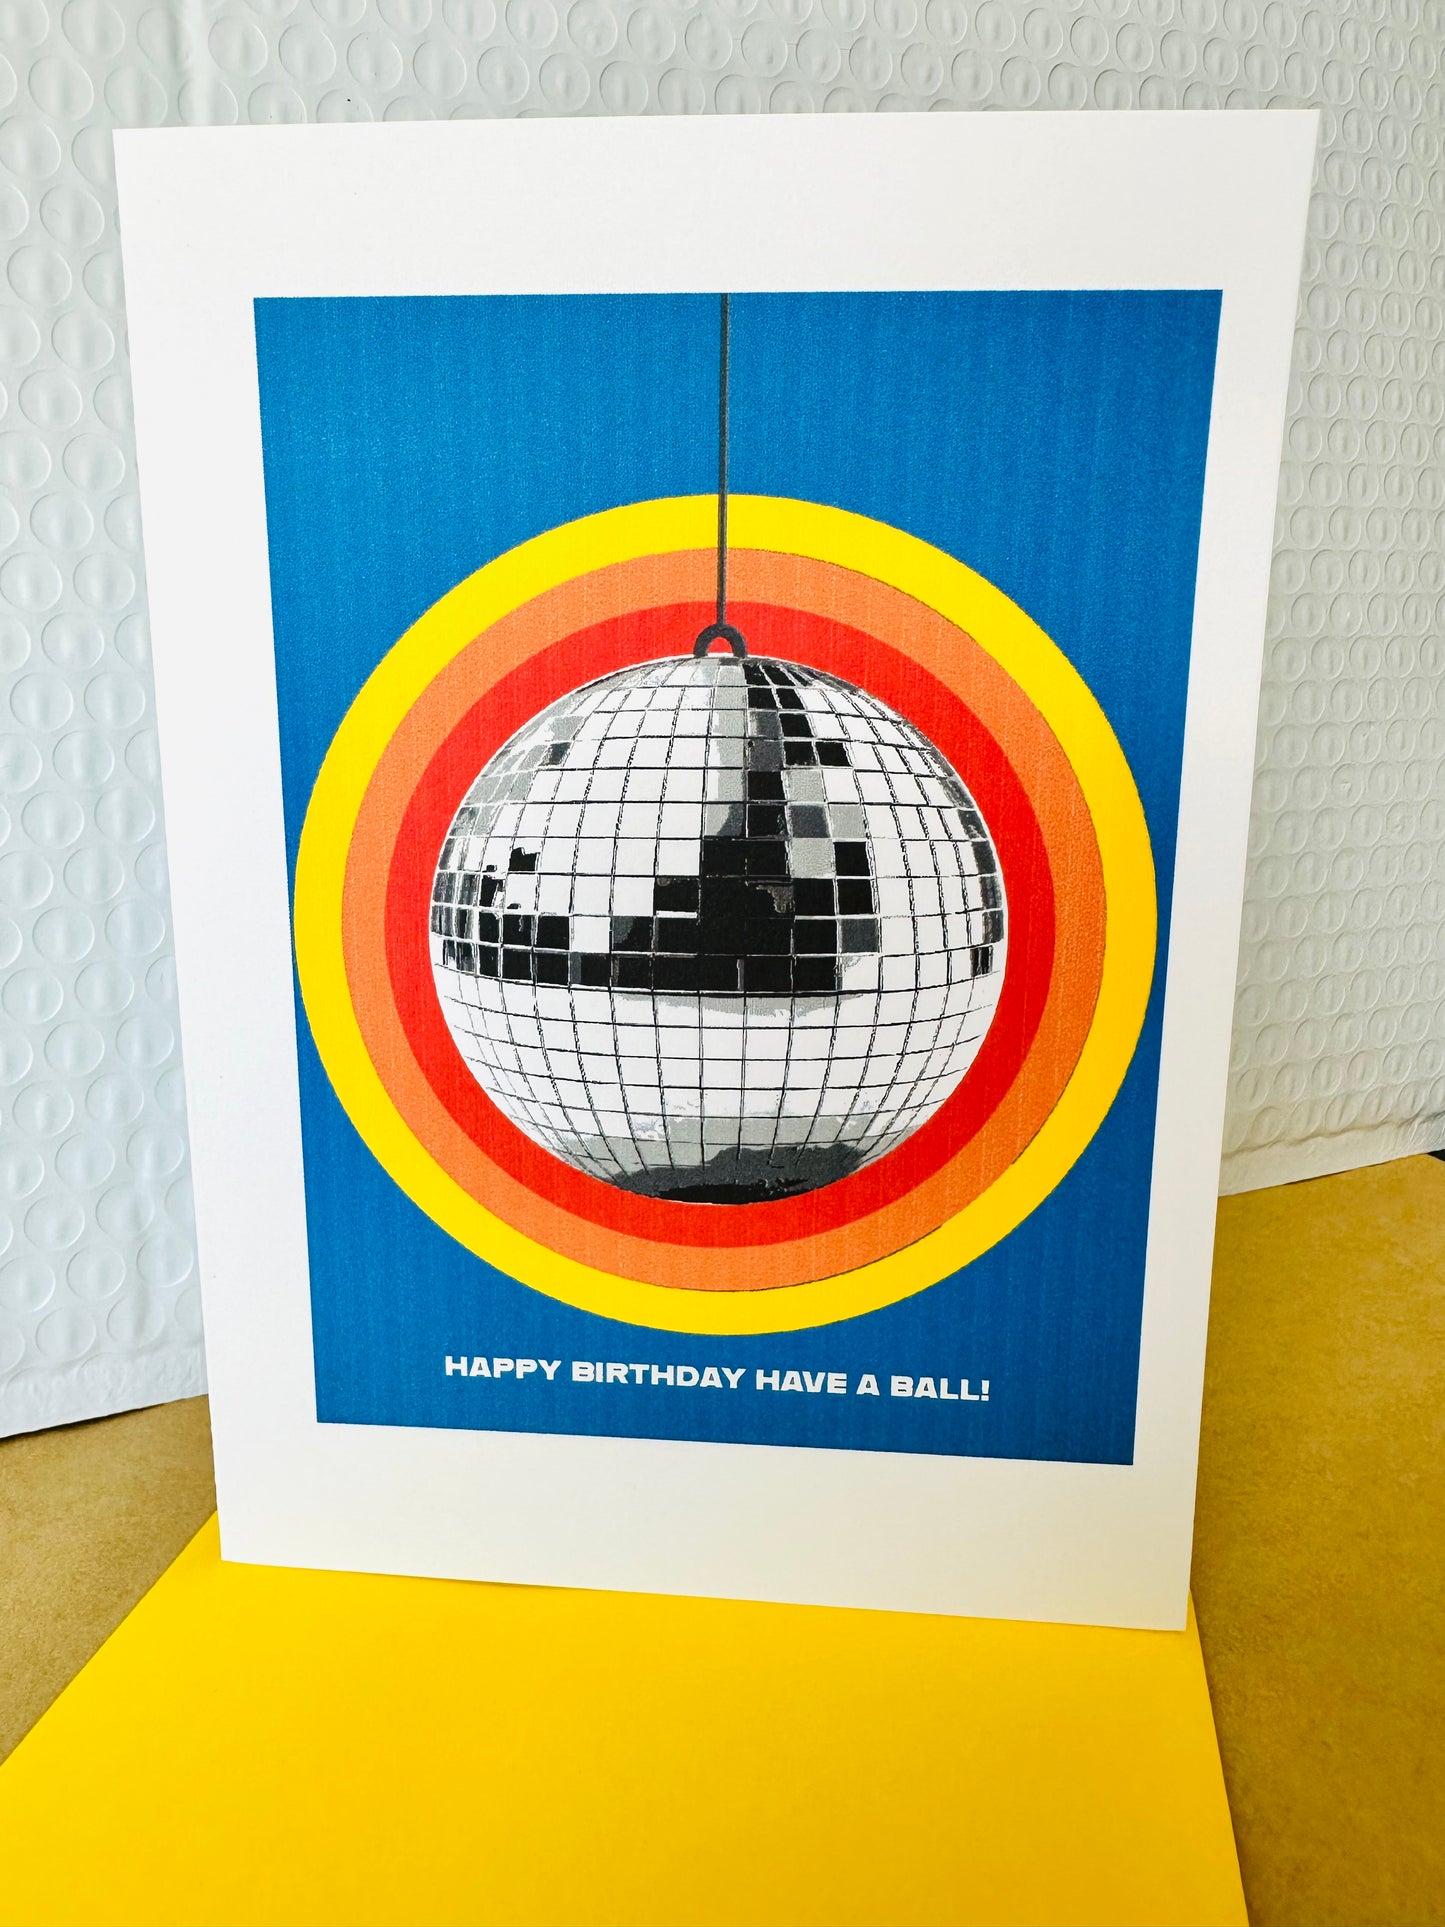 Happy Birthday Queen or Have a Ball!  5x7 Disco Mirror Party ball greeting card for are party friends